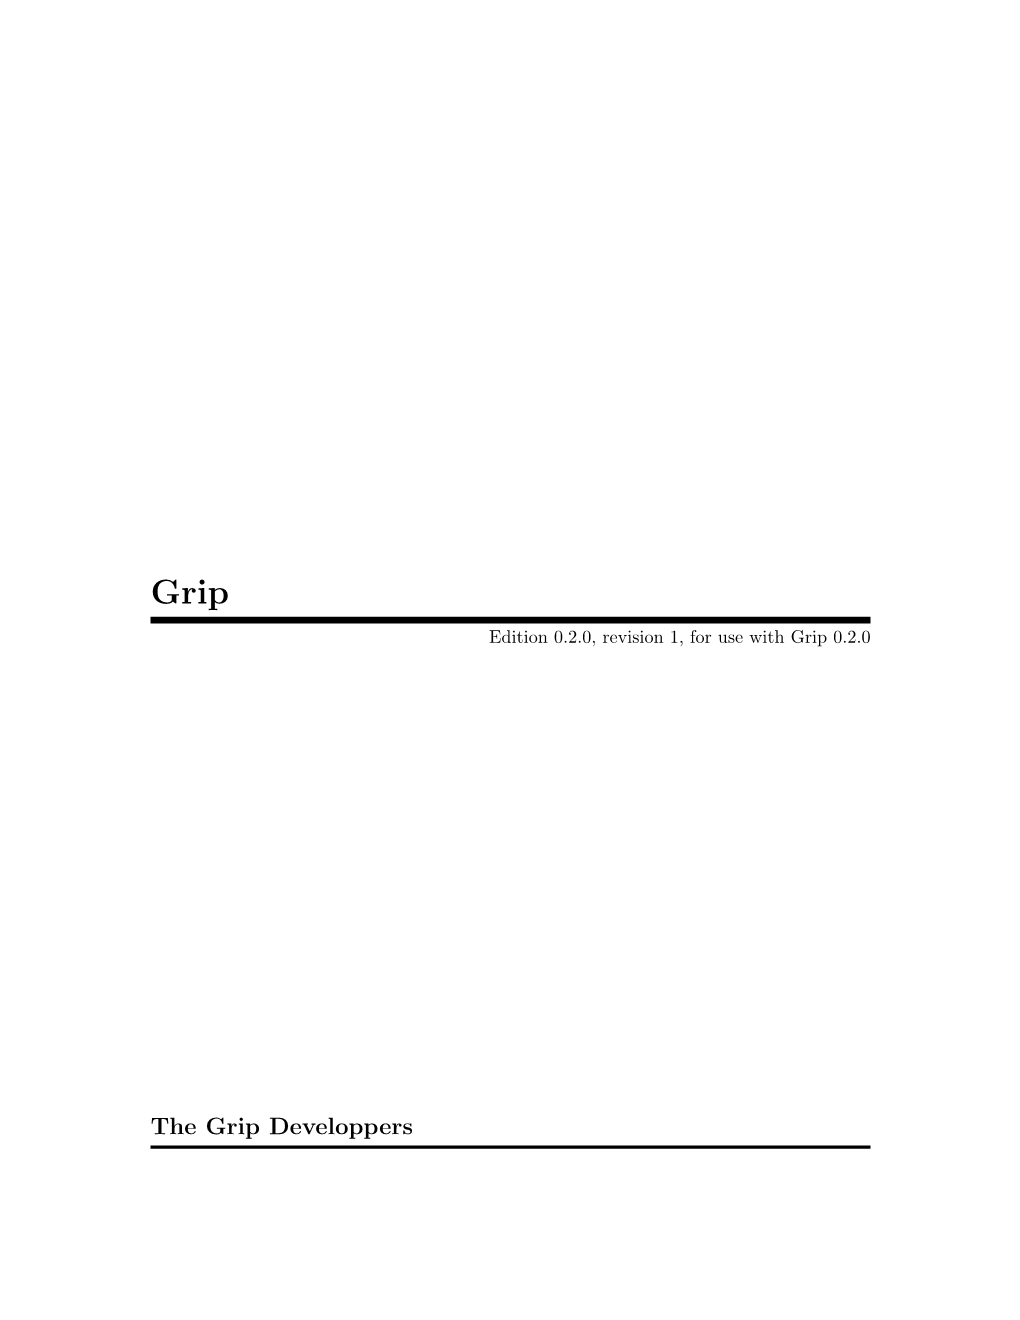 The Grip Developpers This Manual Documents Grip Version 0.2.0